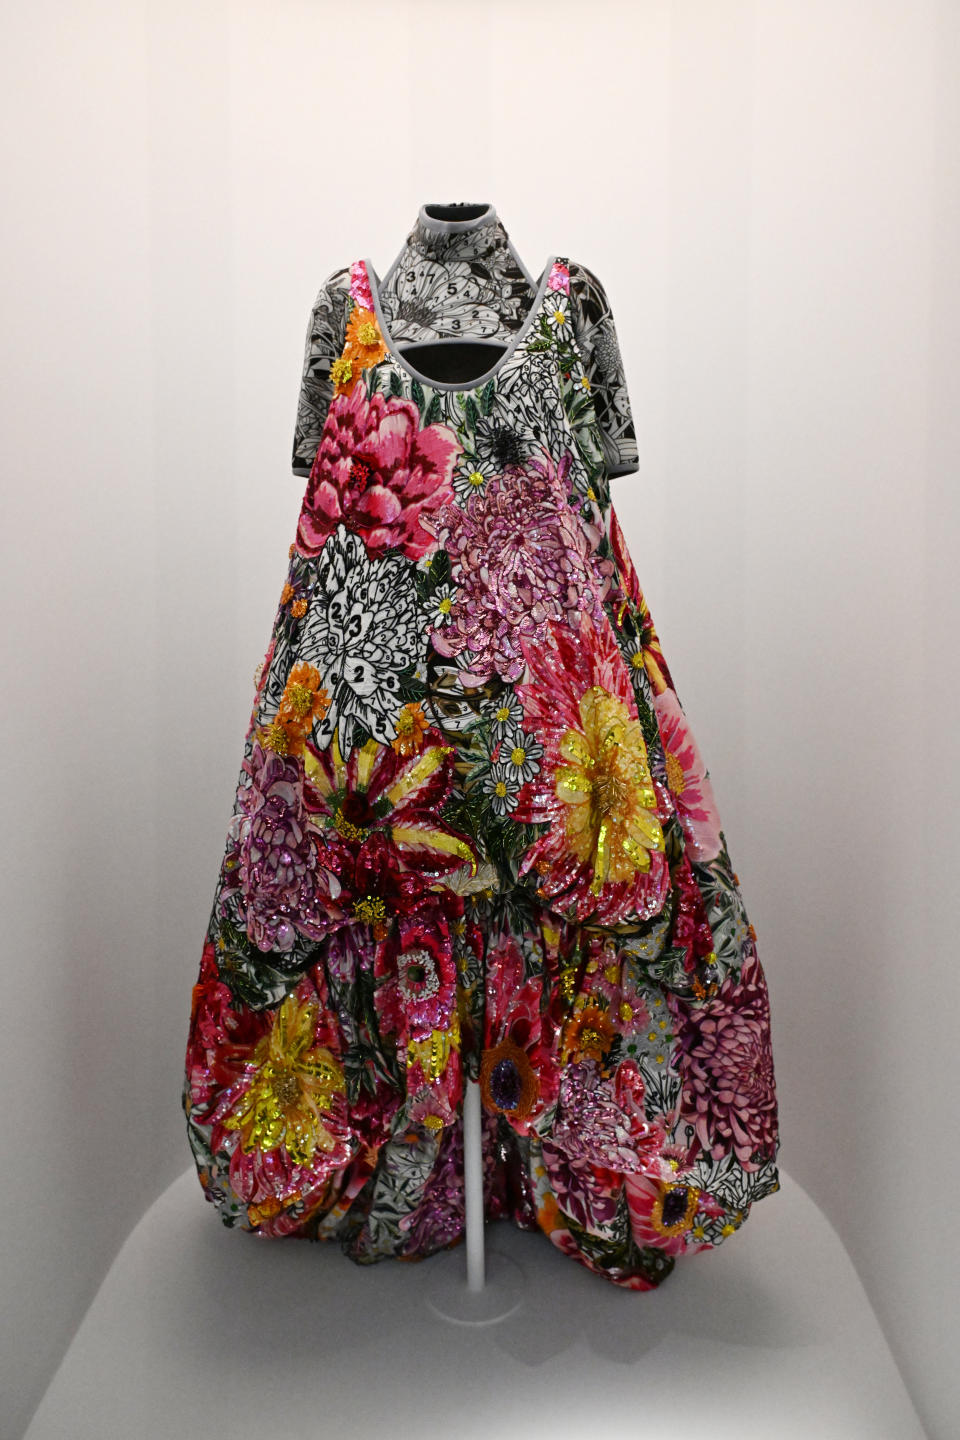 Floral patterned dress on a mannequin, sleeveless with a full skirt